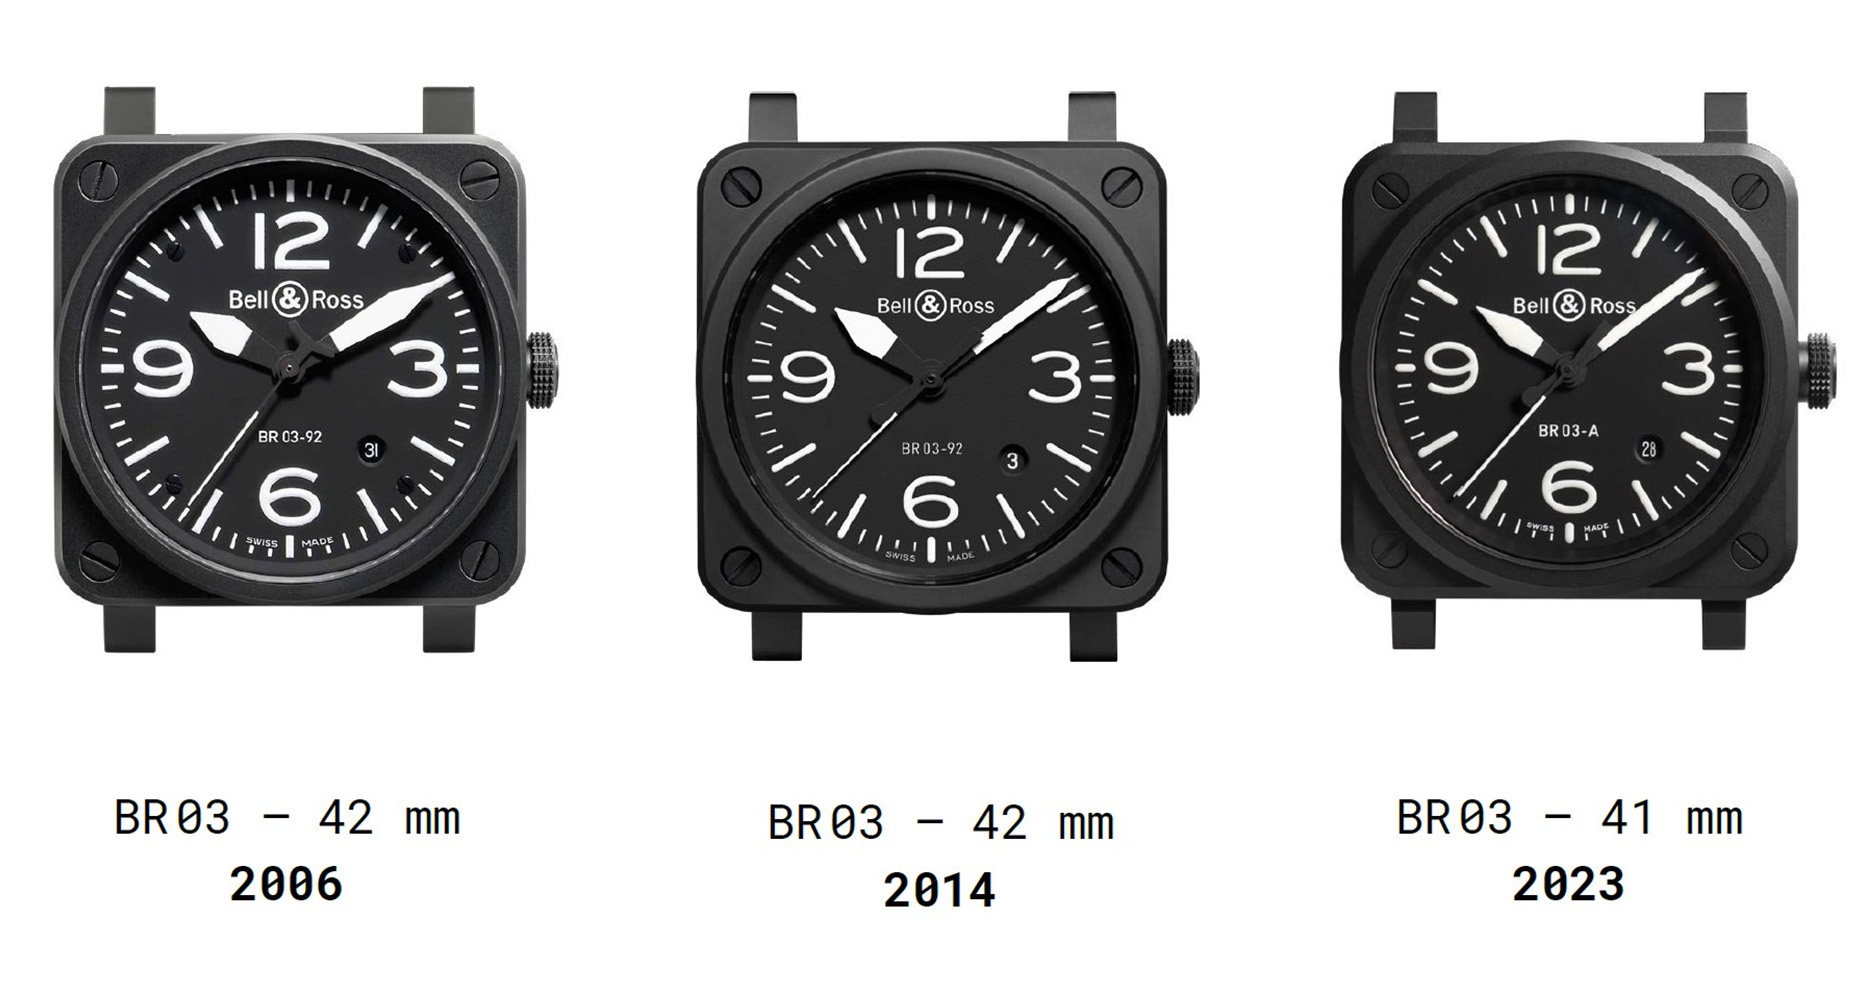 The Bell & Ross BR 03 collection has evolved over the years.